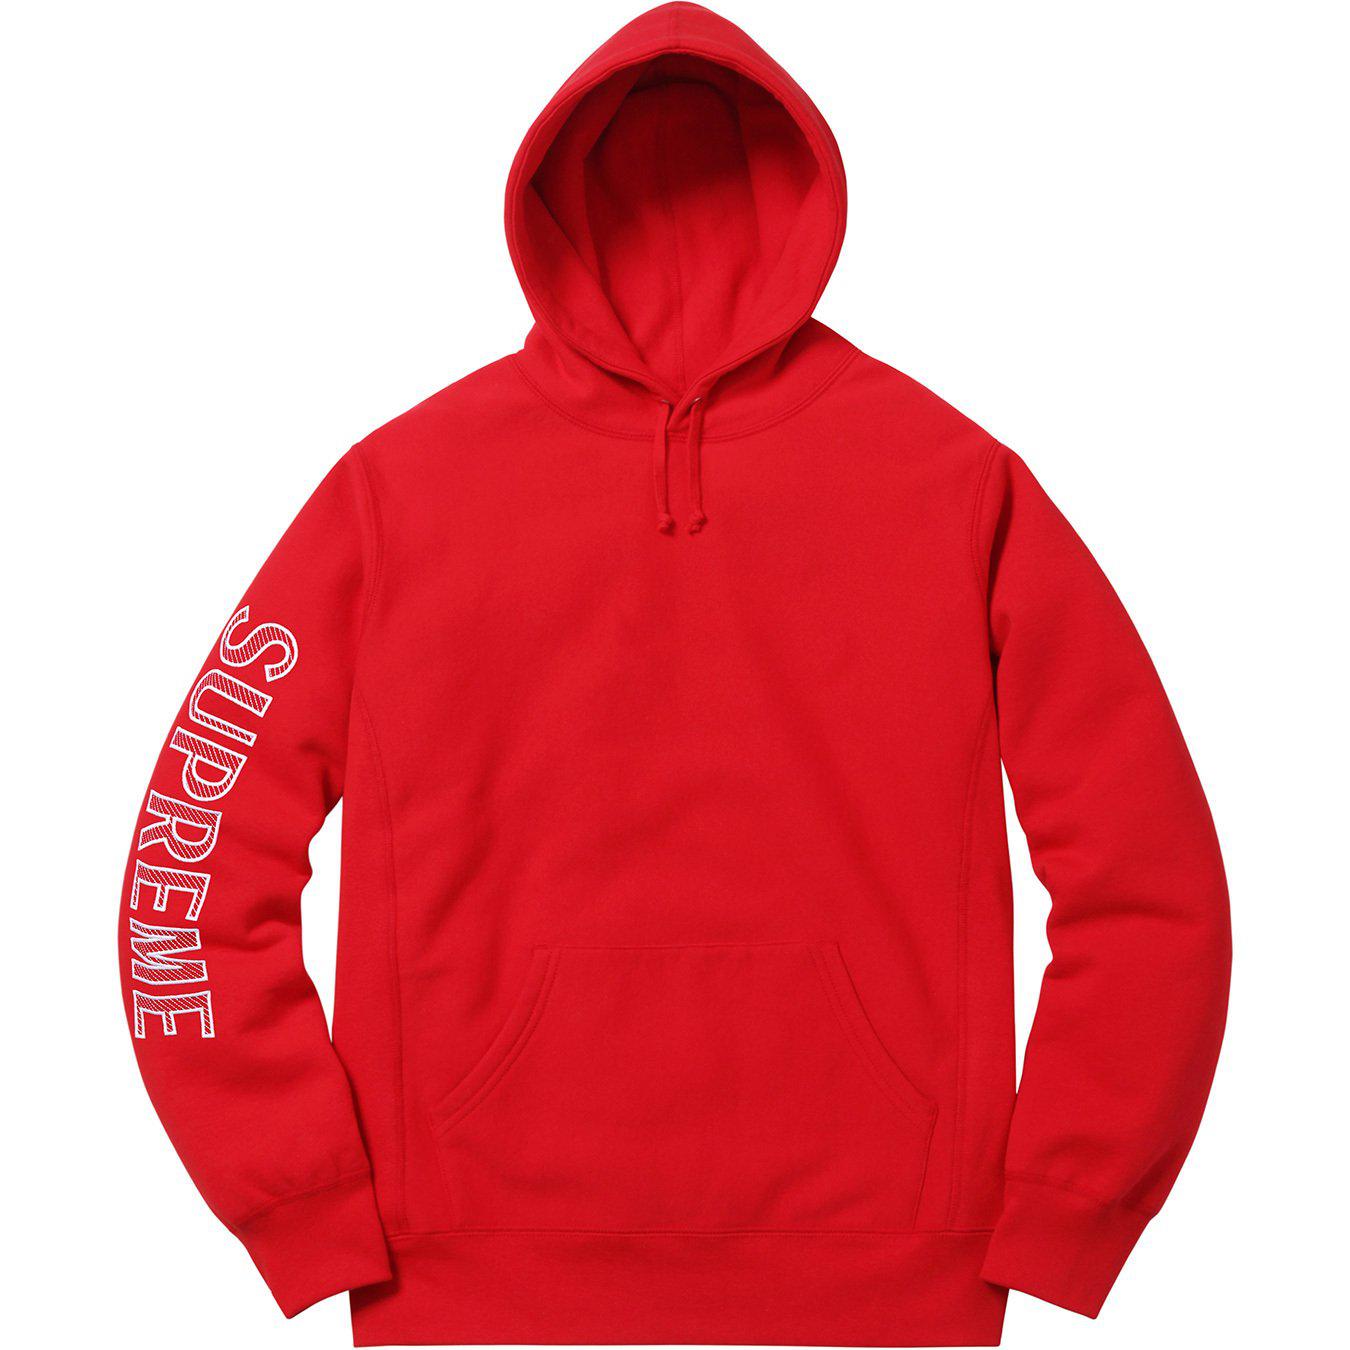 Lyst - Supreme Sleeve Embroidery Hooded Sweatshirt Red in Red for Men